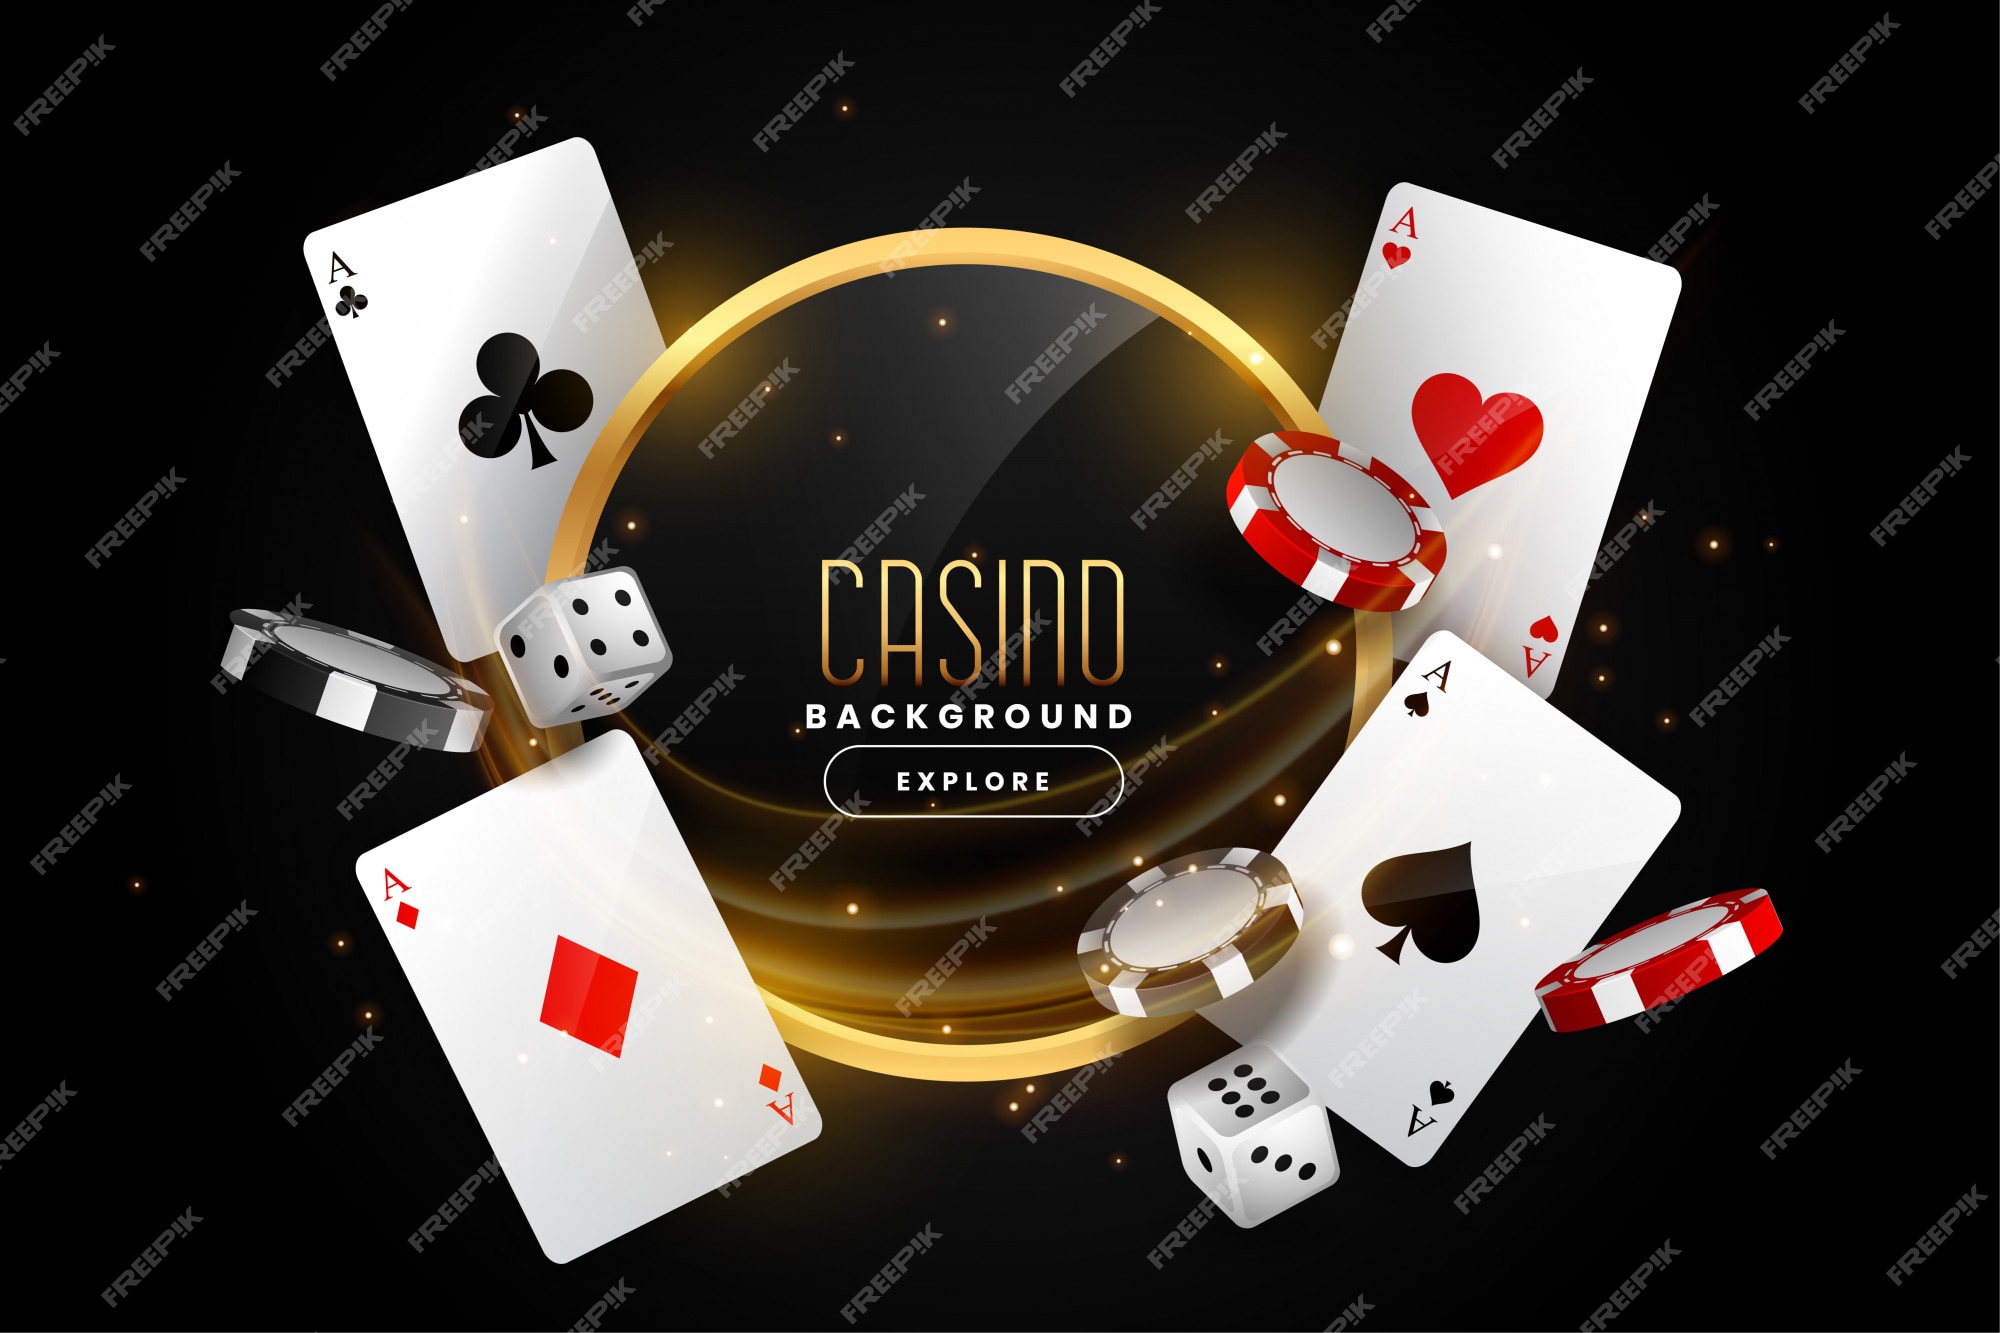 Casino background Images | Free Vectors, Stock Photos & PSD